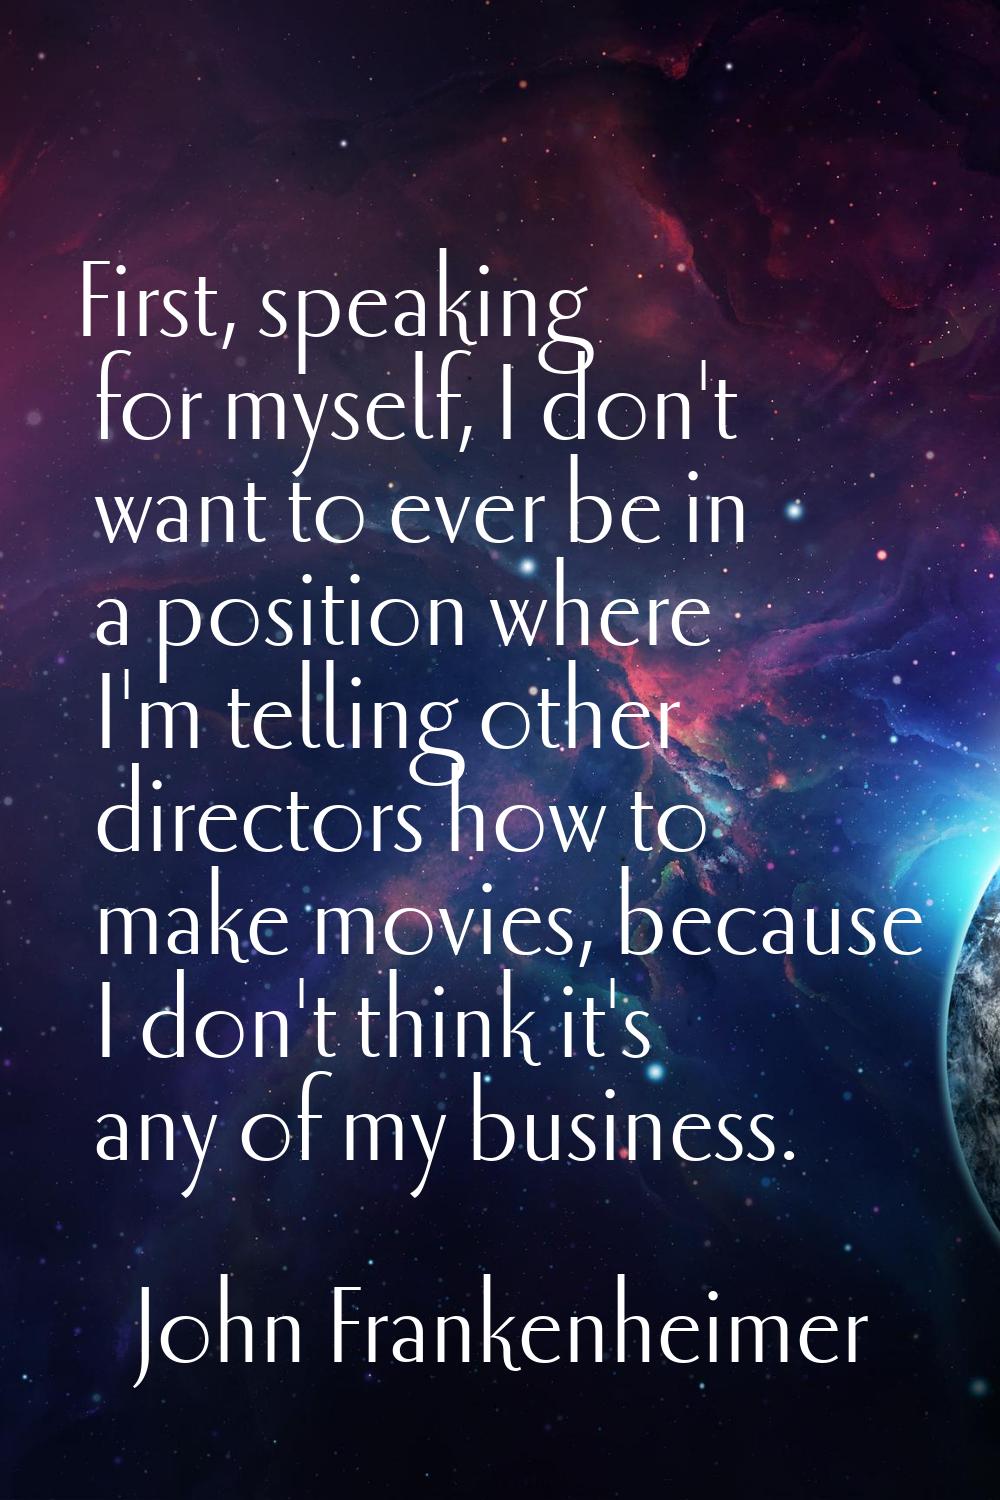 First, speaking for myself, I don't want to ever be in a position where I'm telling other directors